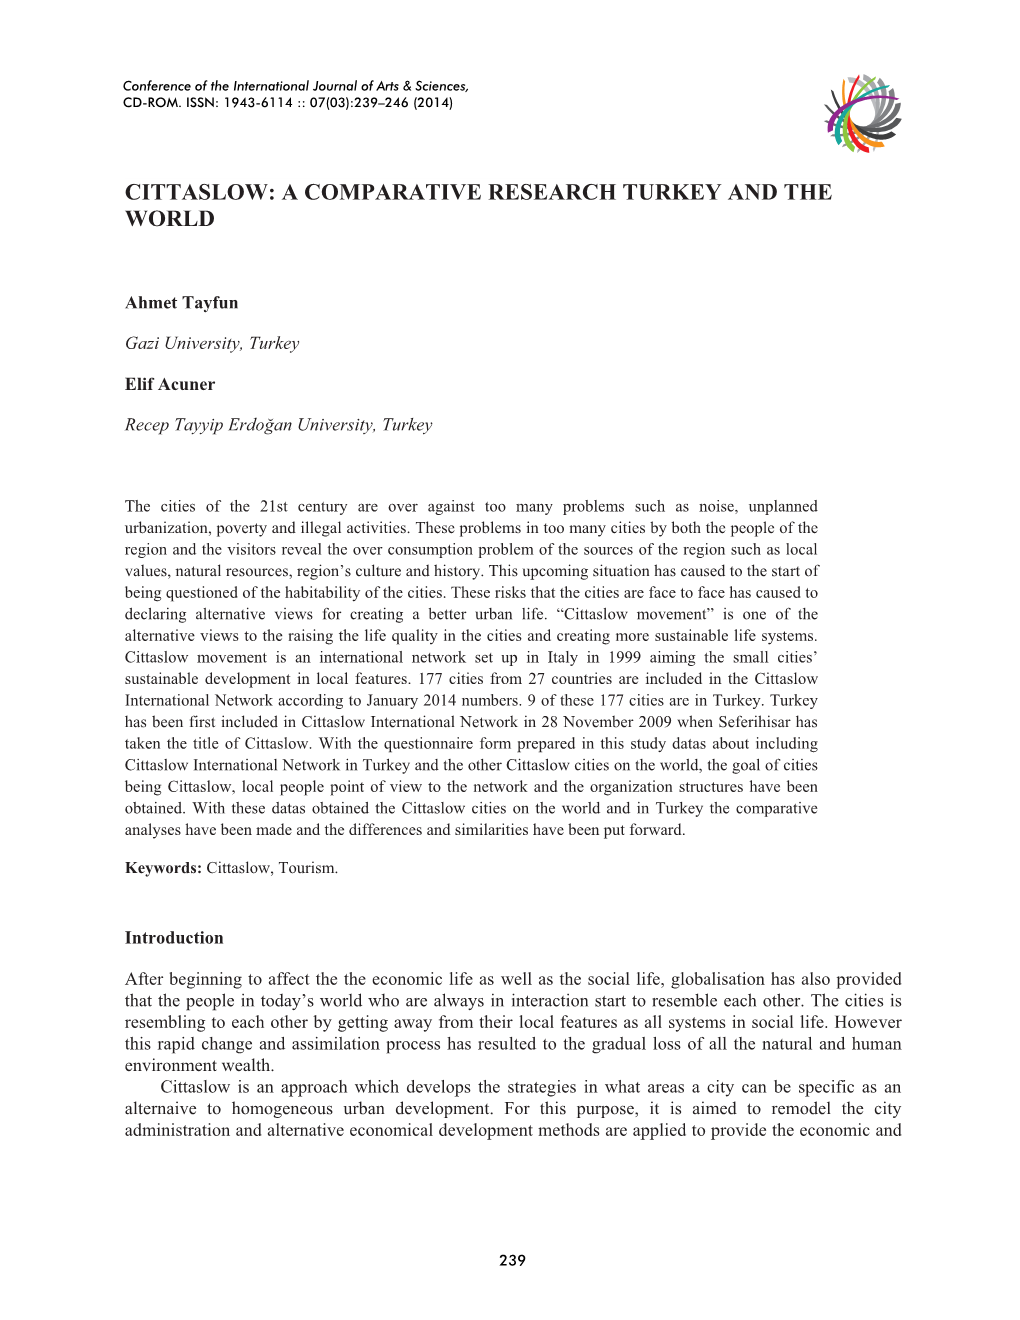 Cittaslow: a Comparative Research Turkey and the World